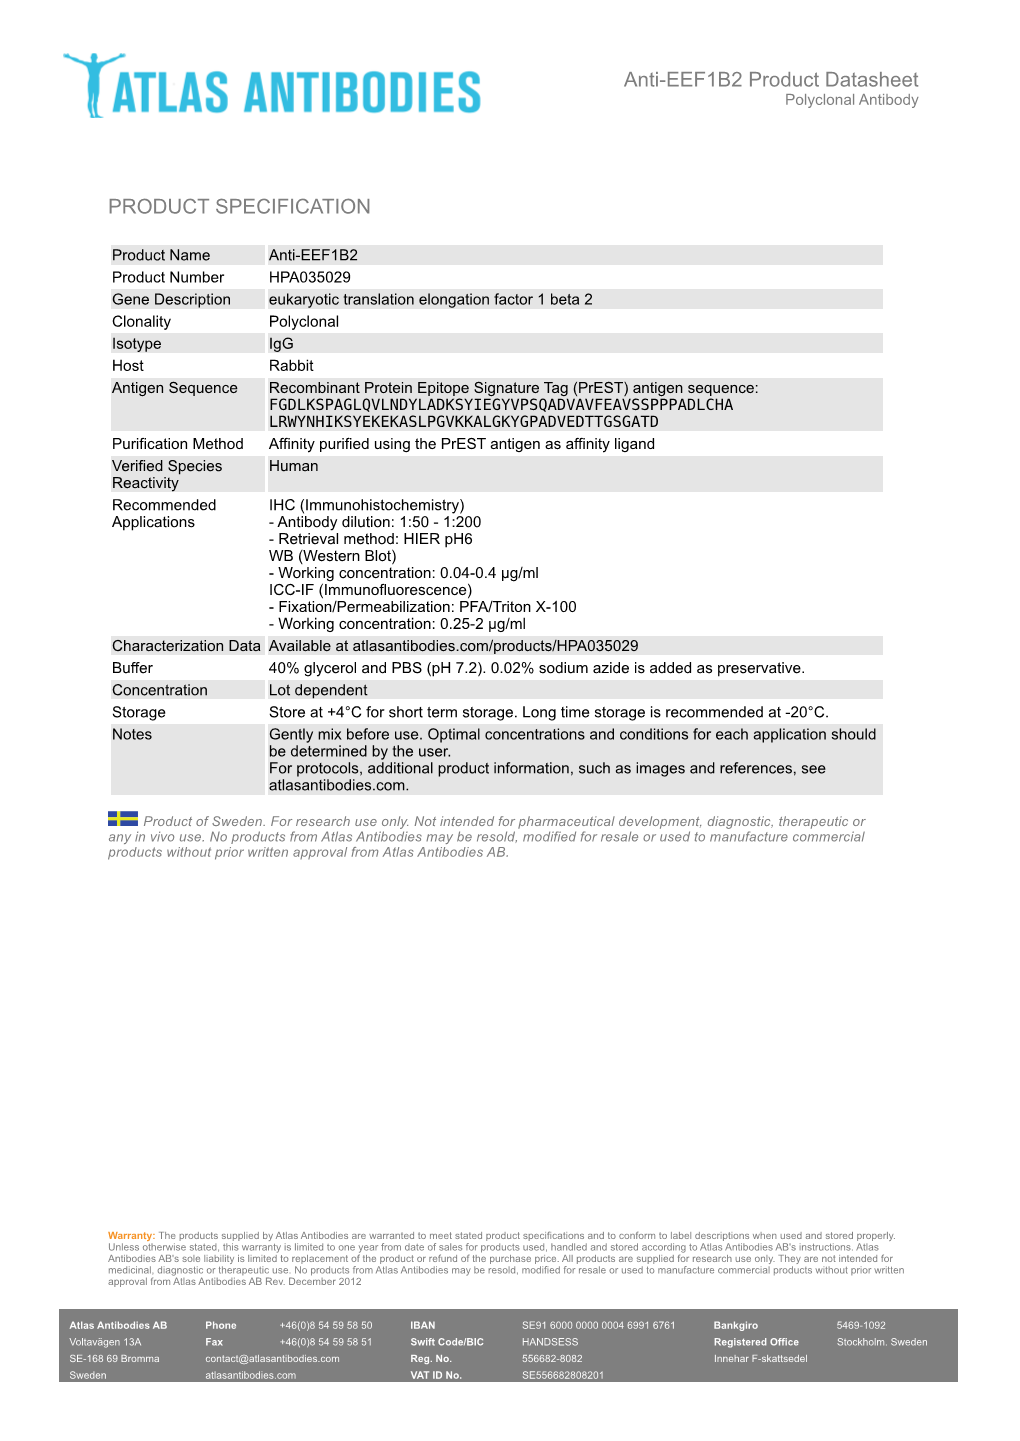 PRODUCT SPECIFICATION Anti-EEF1B2 Product Datasheet